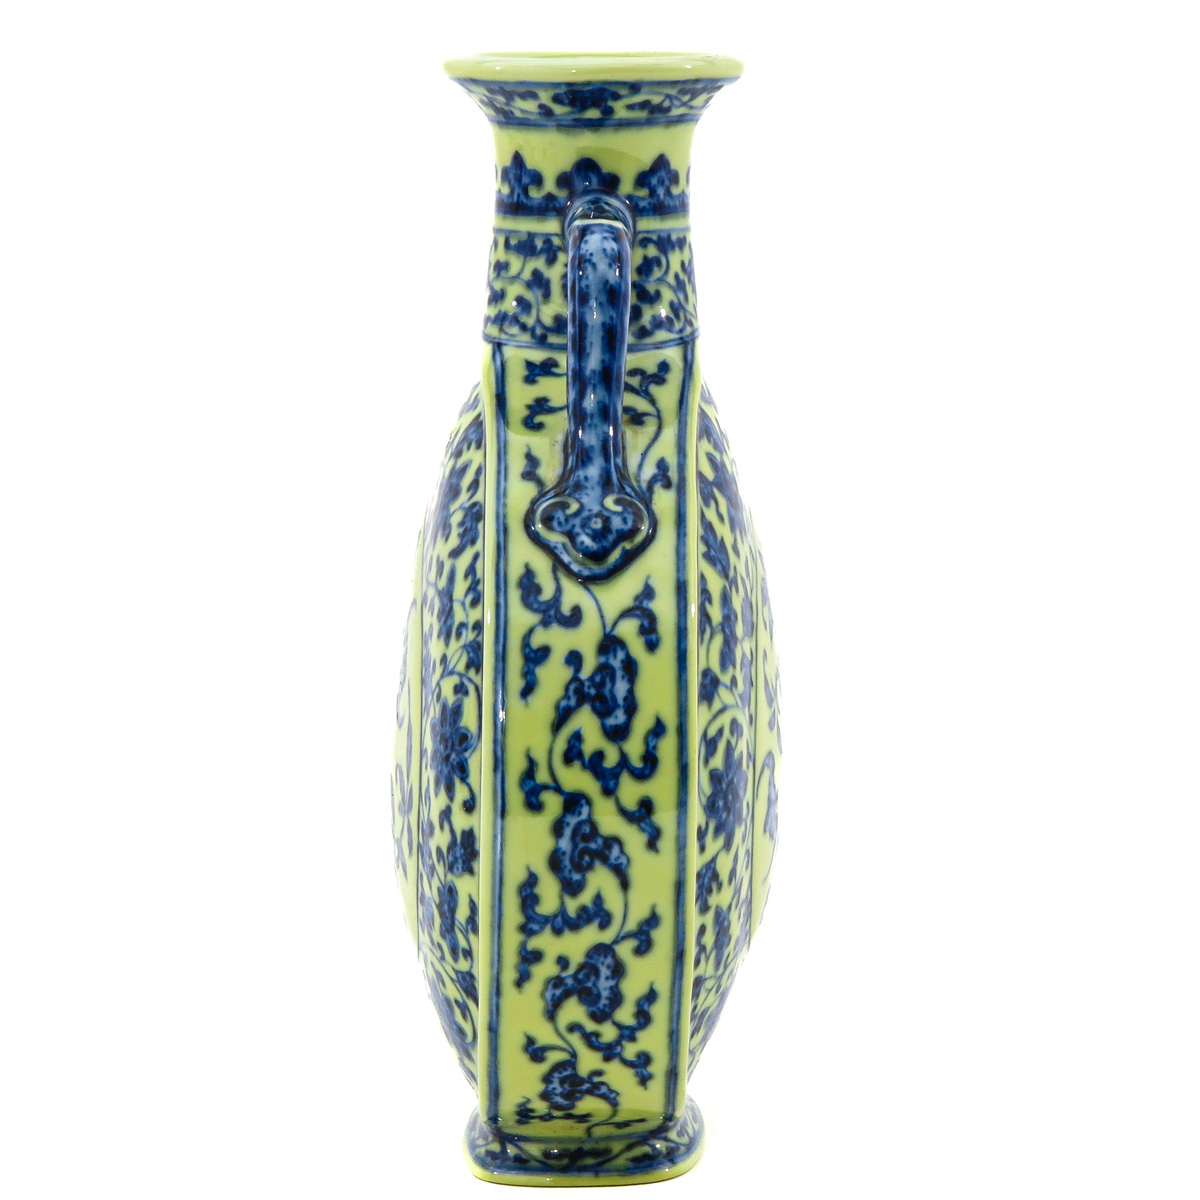 A Yellow and Blue Moon Bottle Vase - Image 2 of 10